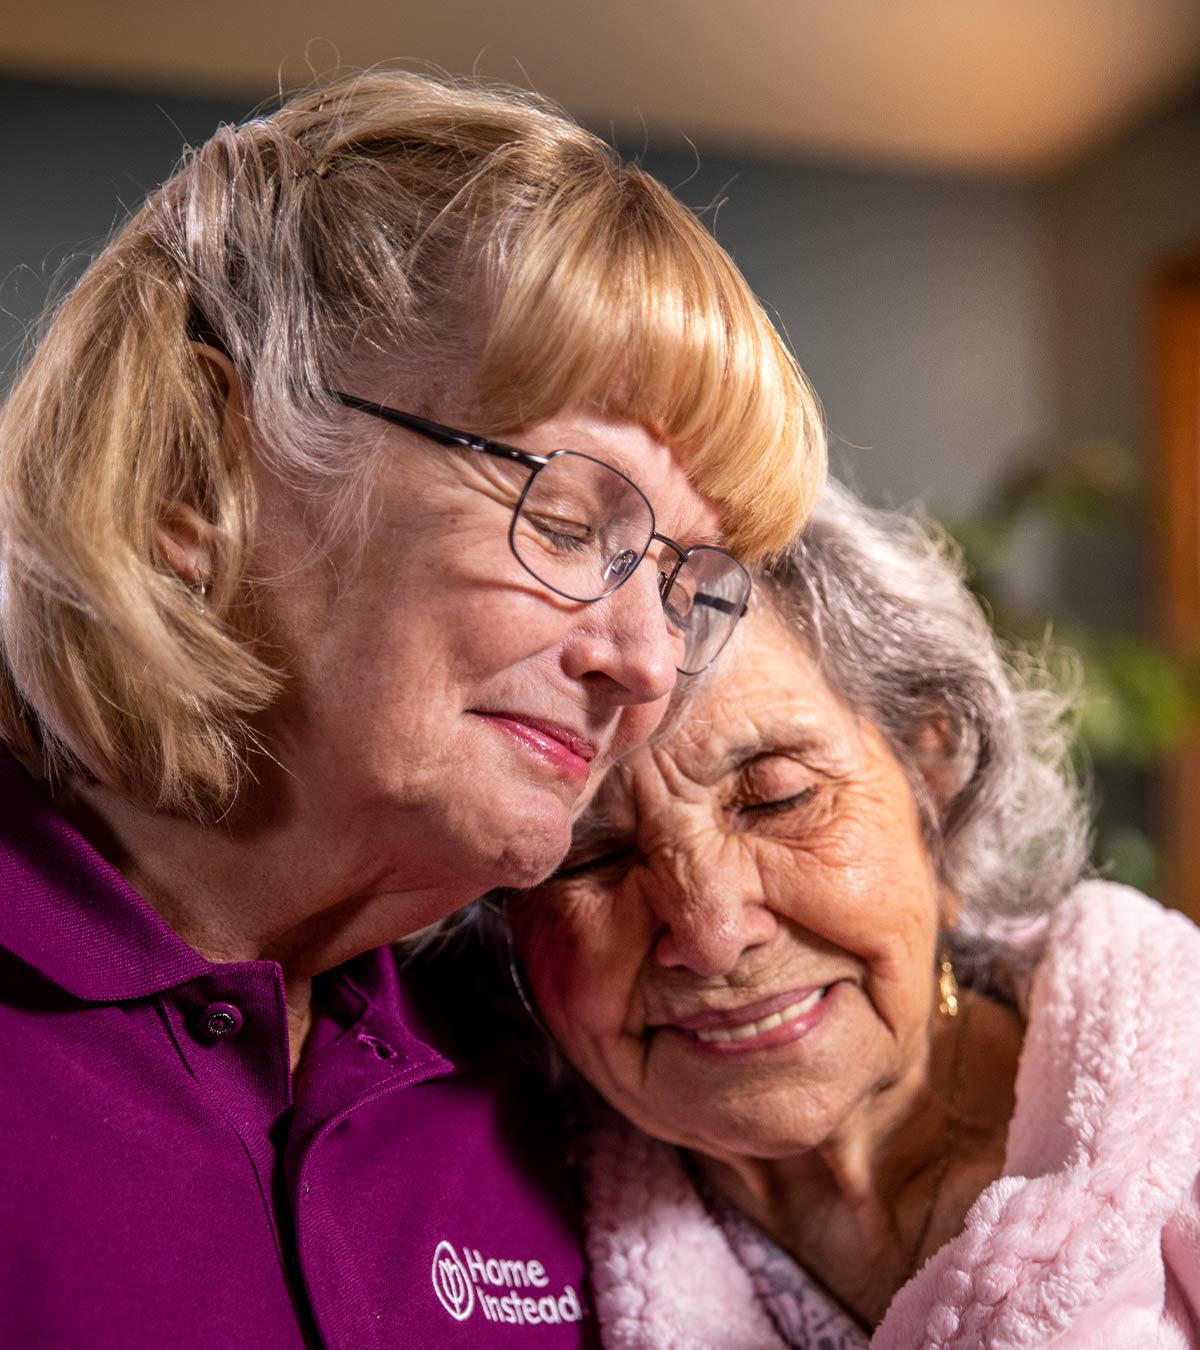 CAREGiver providing in-home senior care services. Home Instead of St Cloud, MN provides Elder Care to aging adults. 